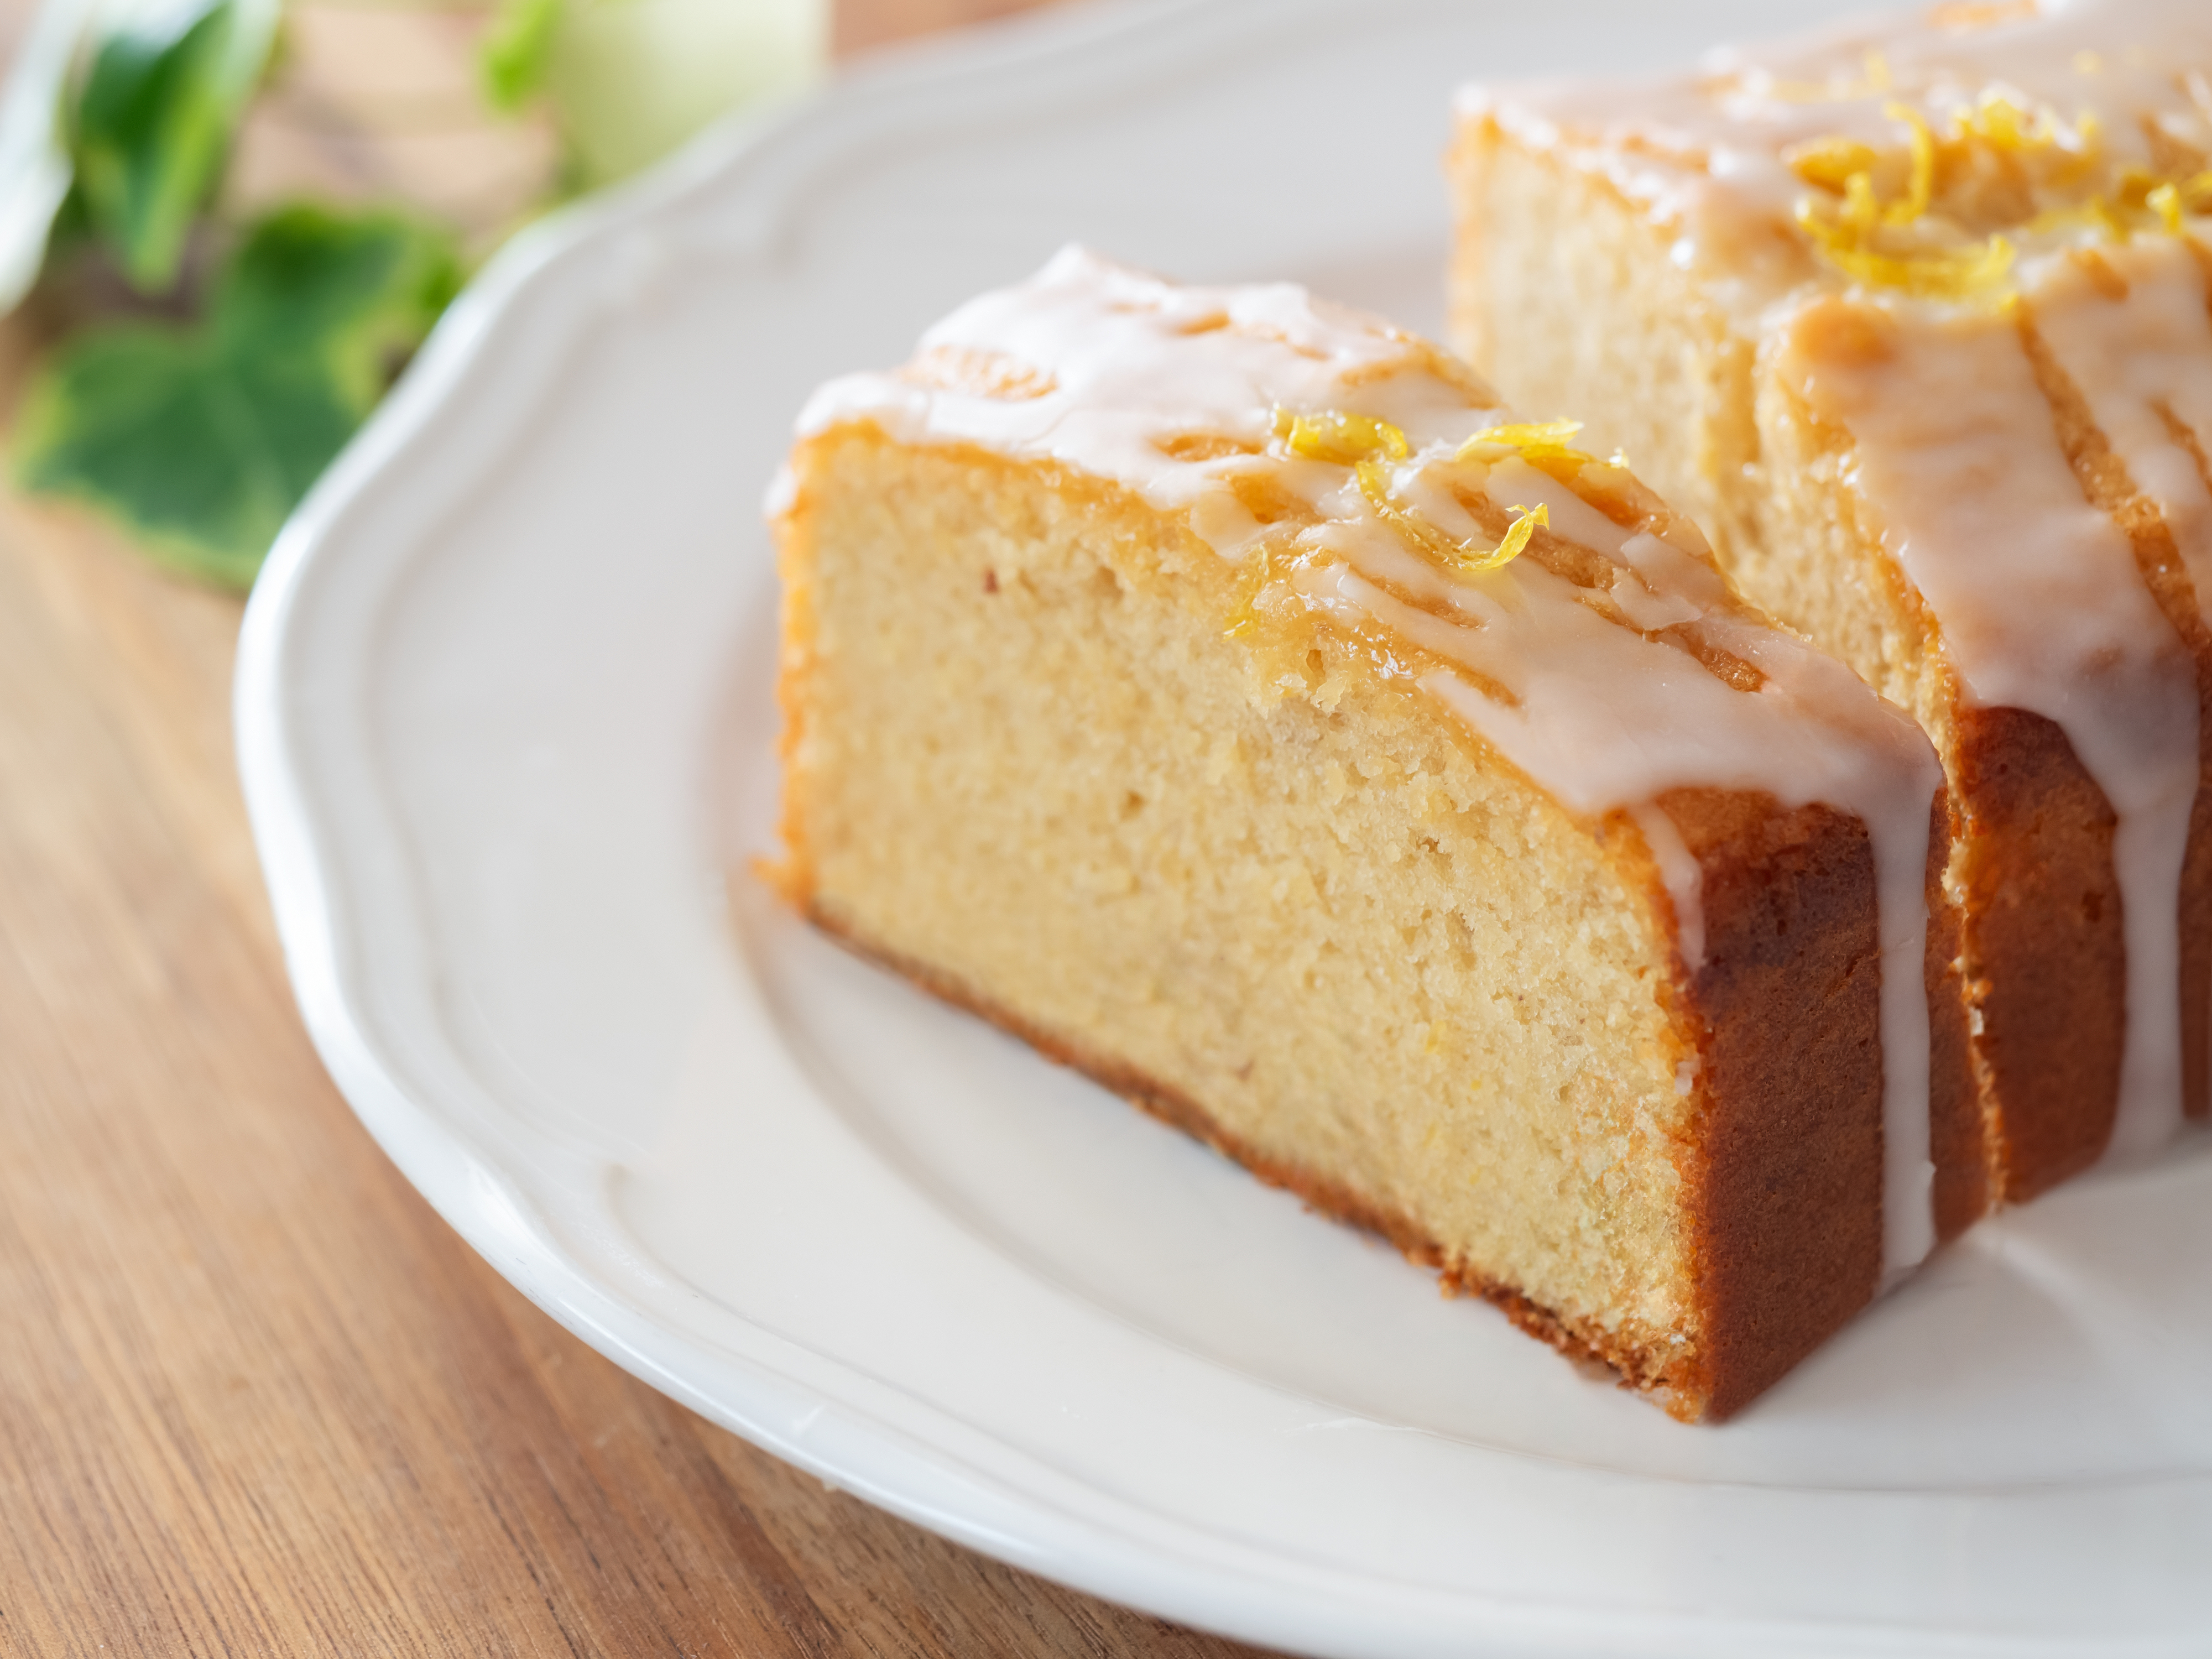 A lemon drizzle cake with icing on top, on a white plate